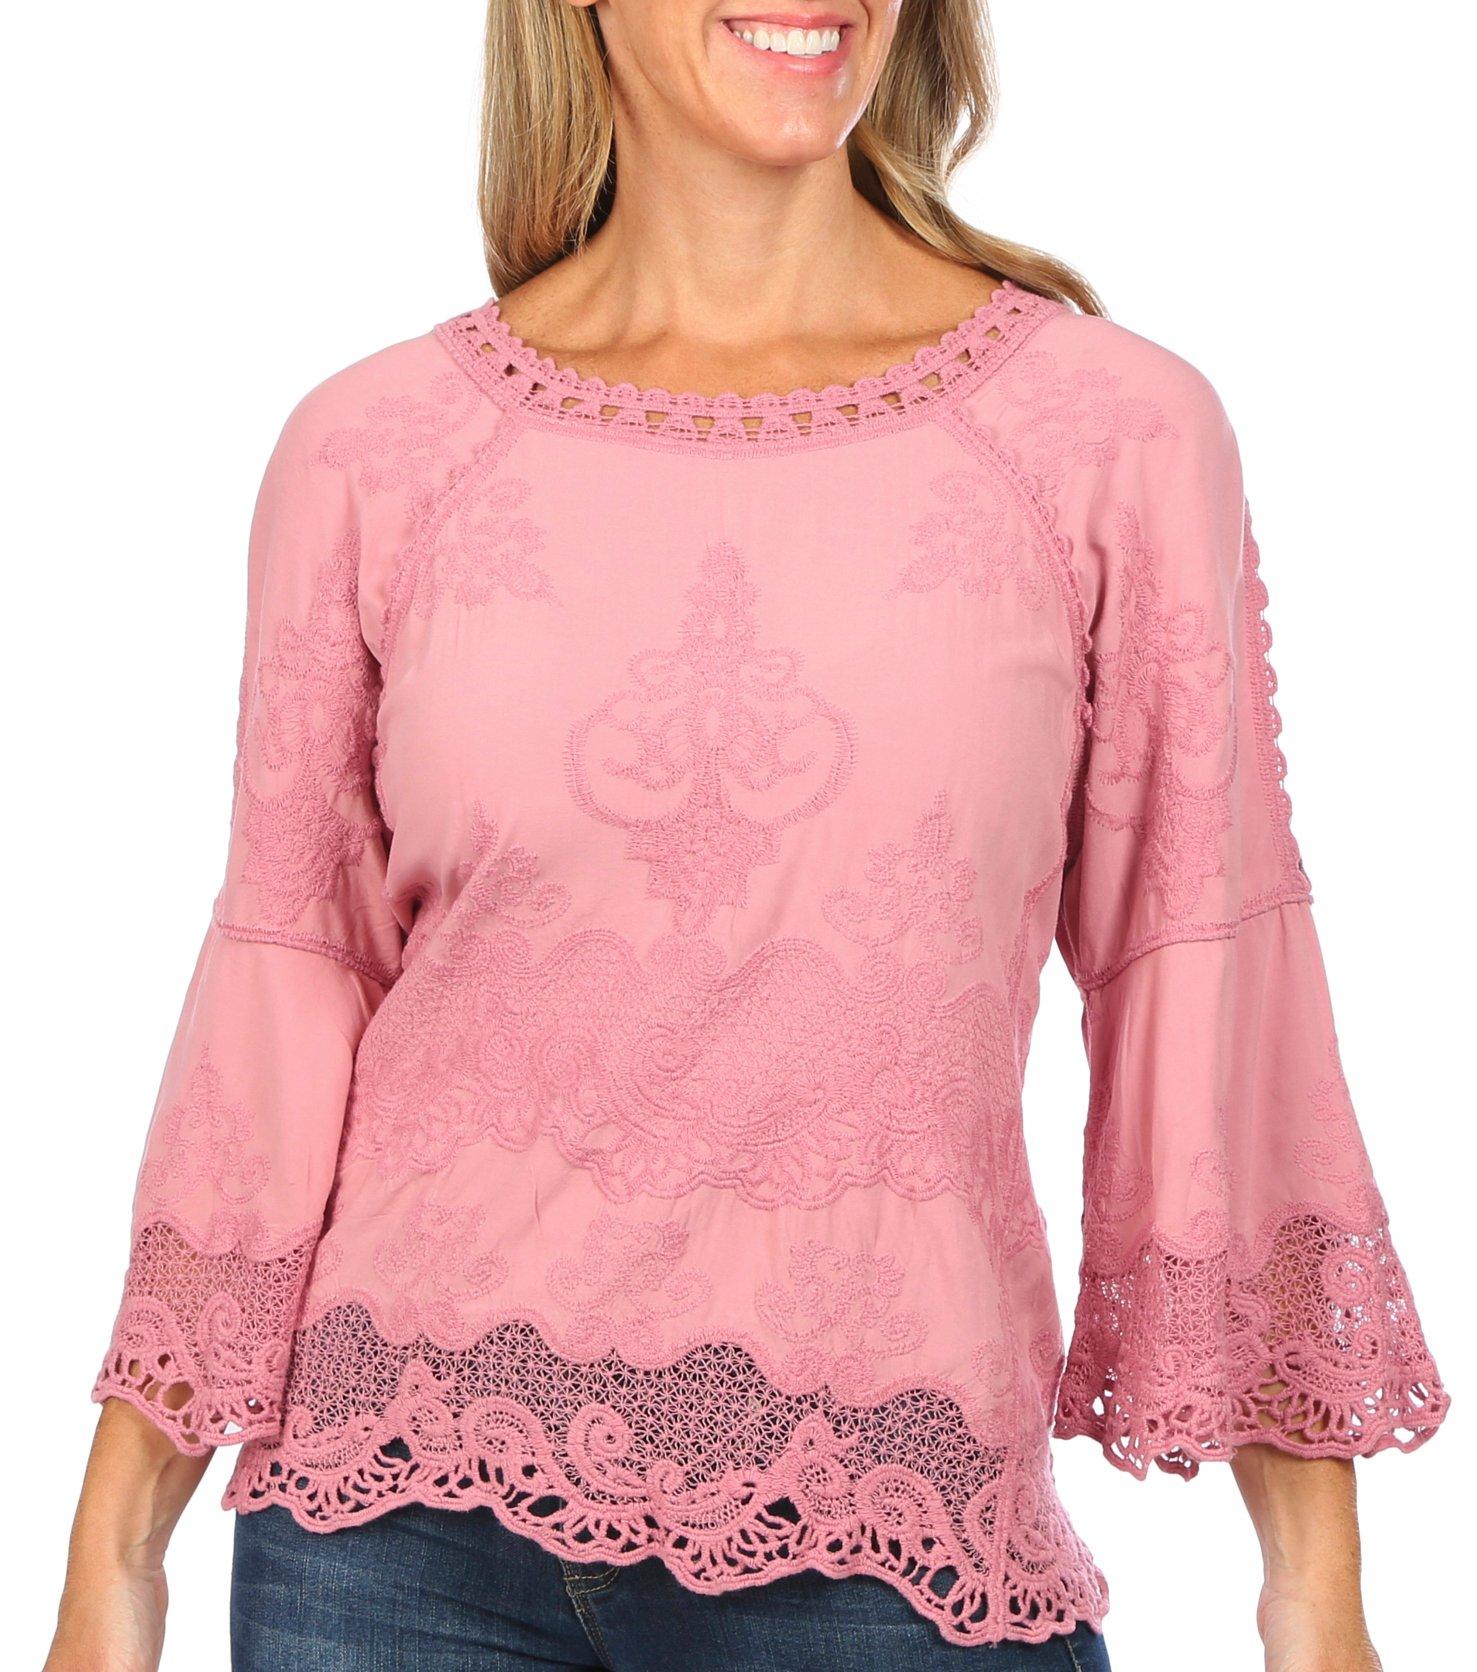 Democracy Womens Lace Embellished Top 3/4 Sleeve Top